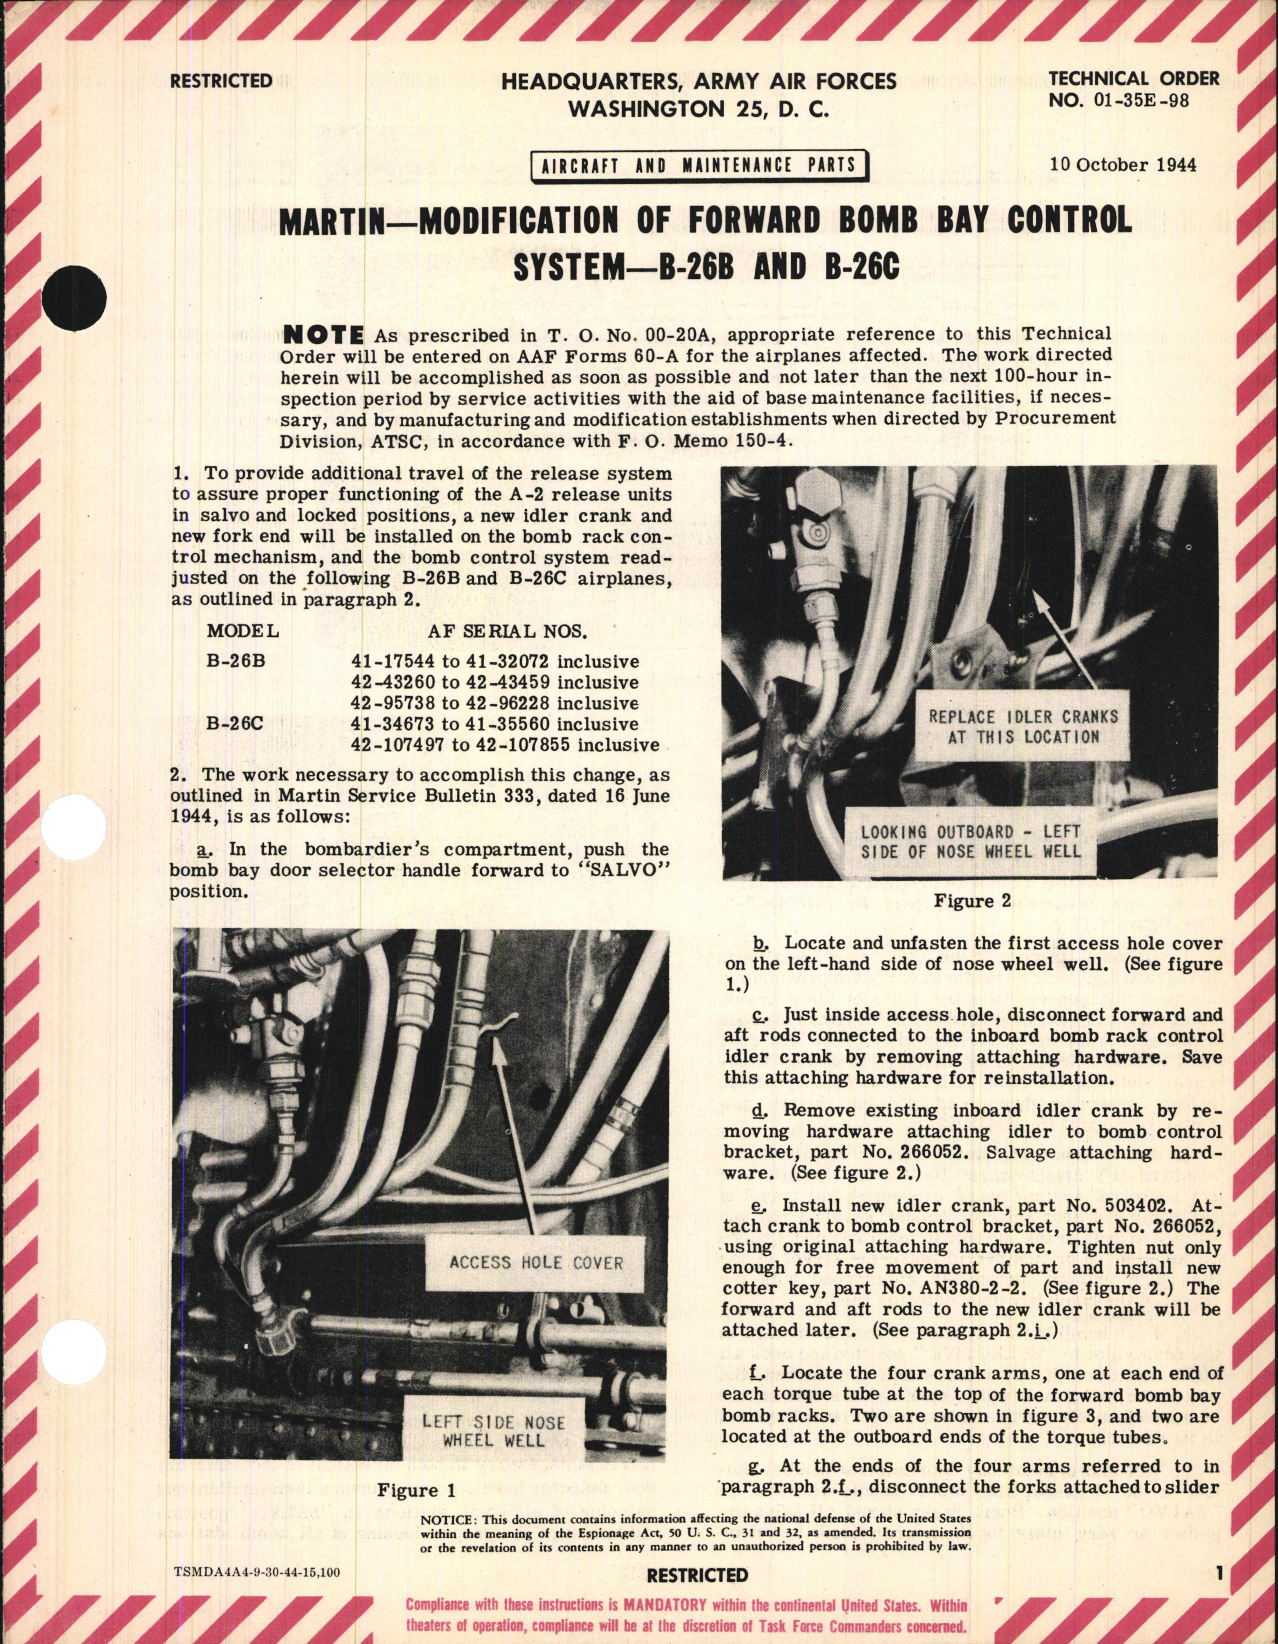 Sample page 1 from AirCorps Library document: Modification of Forward Bomb Bay Control System for B-26B and B-26C